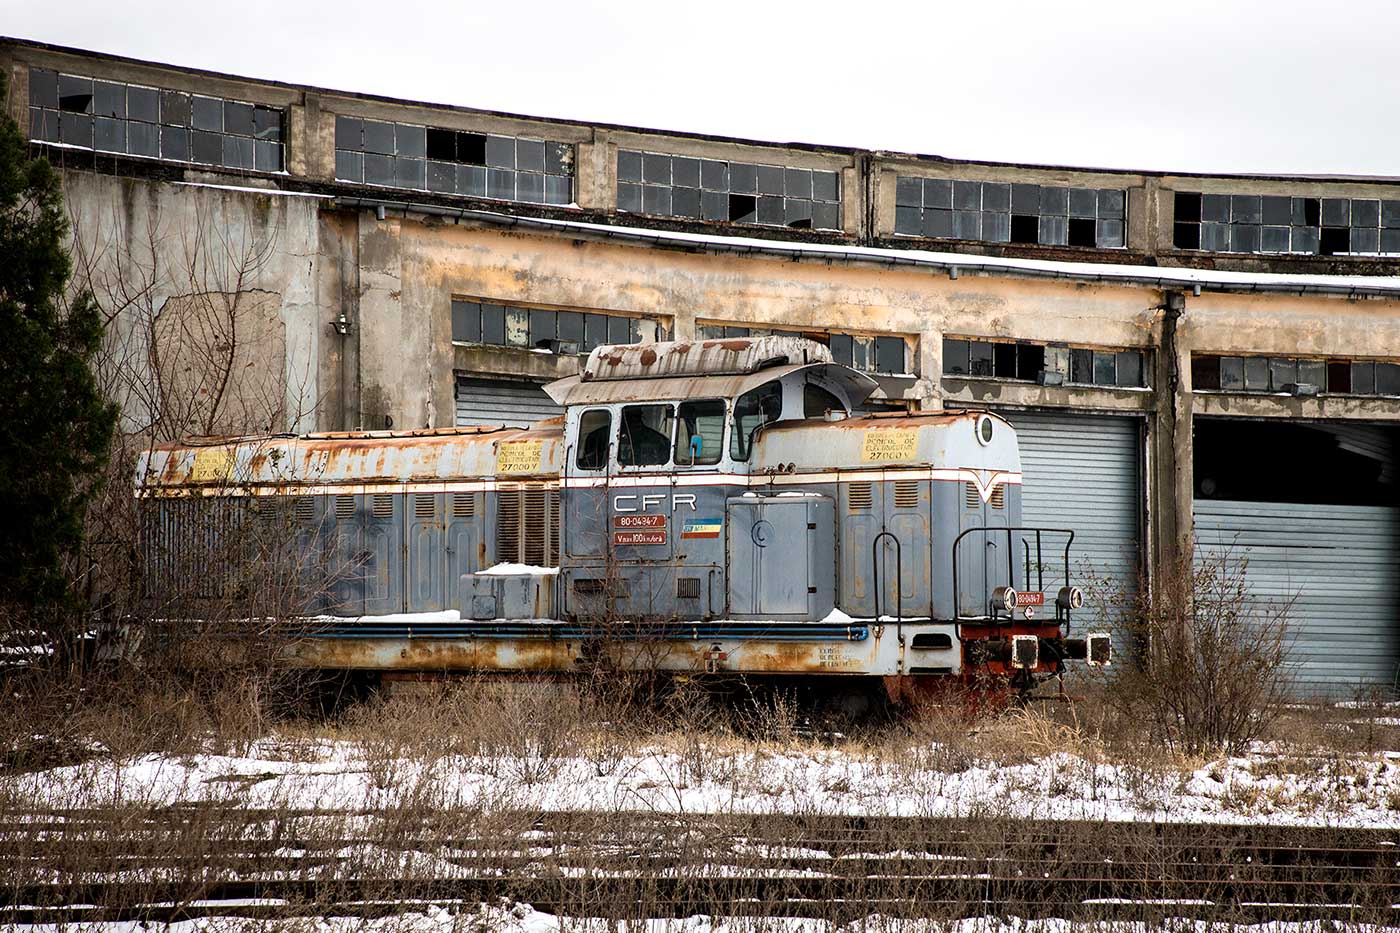 A Class 80 diesel hydraulic – built between 1966 and 1985 by Faur – left rusting beside a railway turntable.